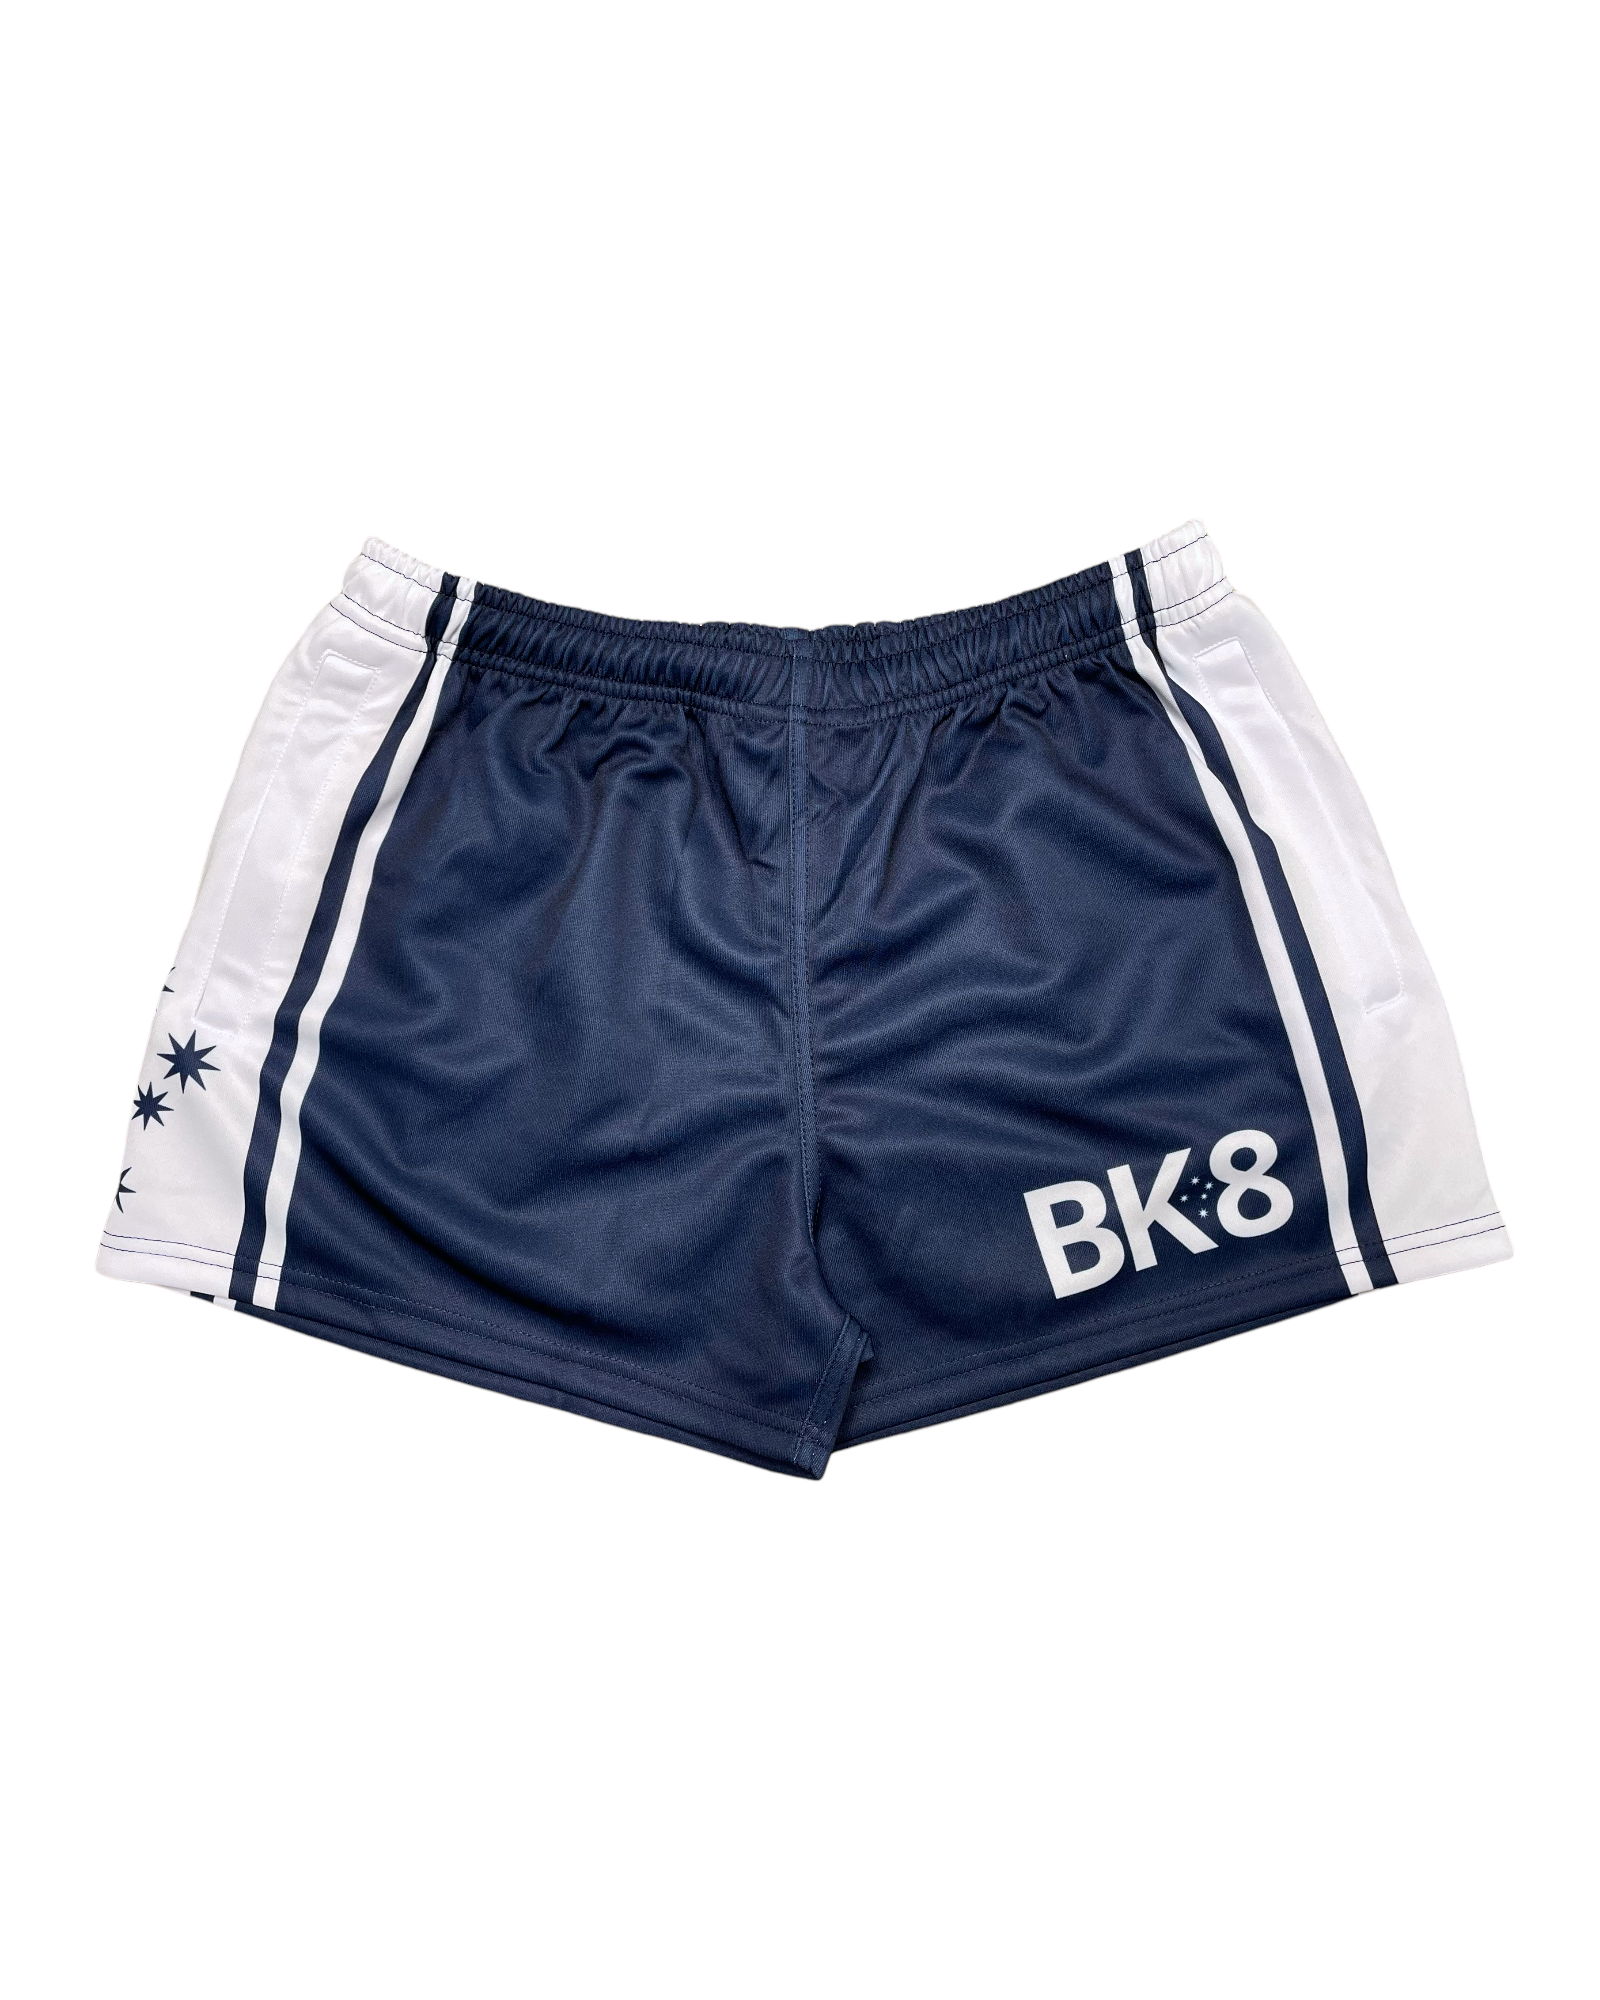 Adults | Footy Shorts | Heritage | Navy